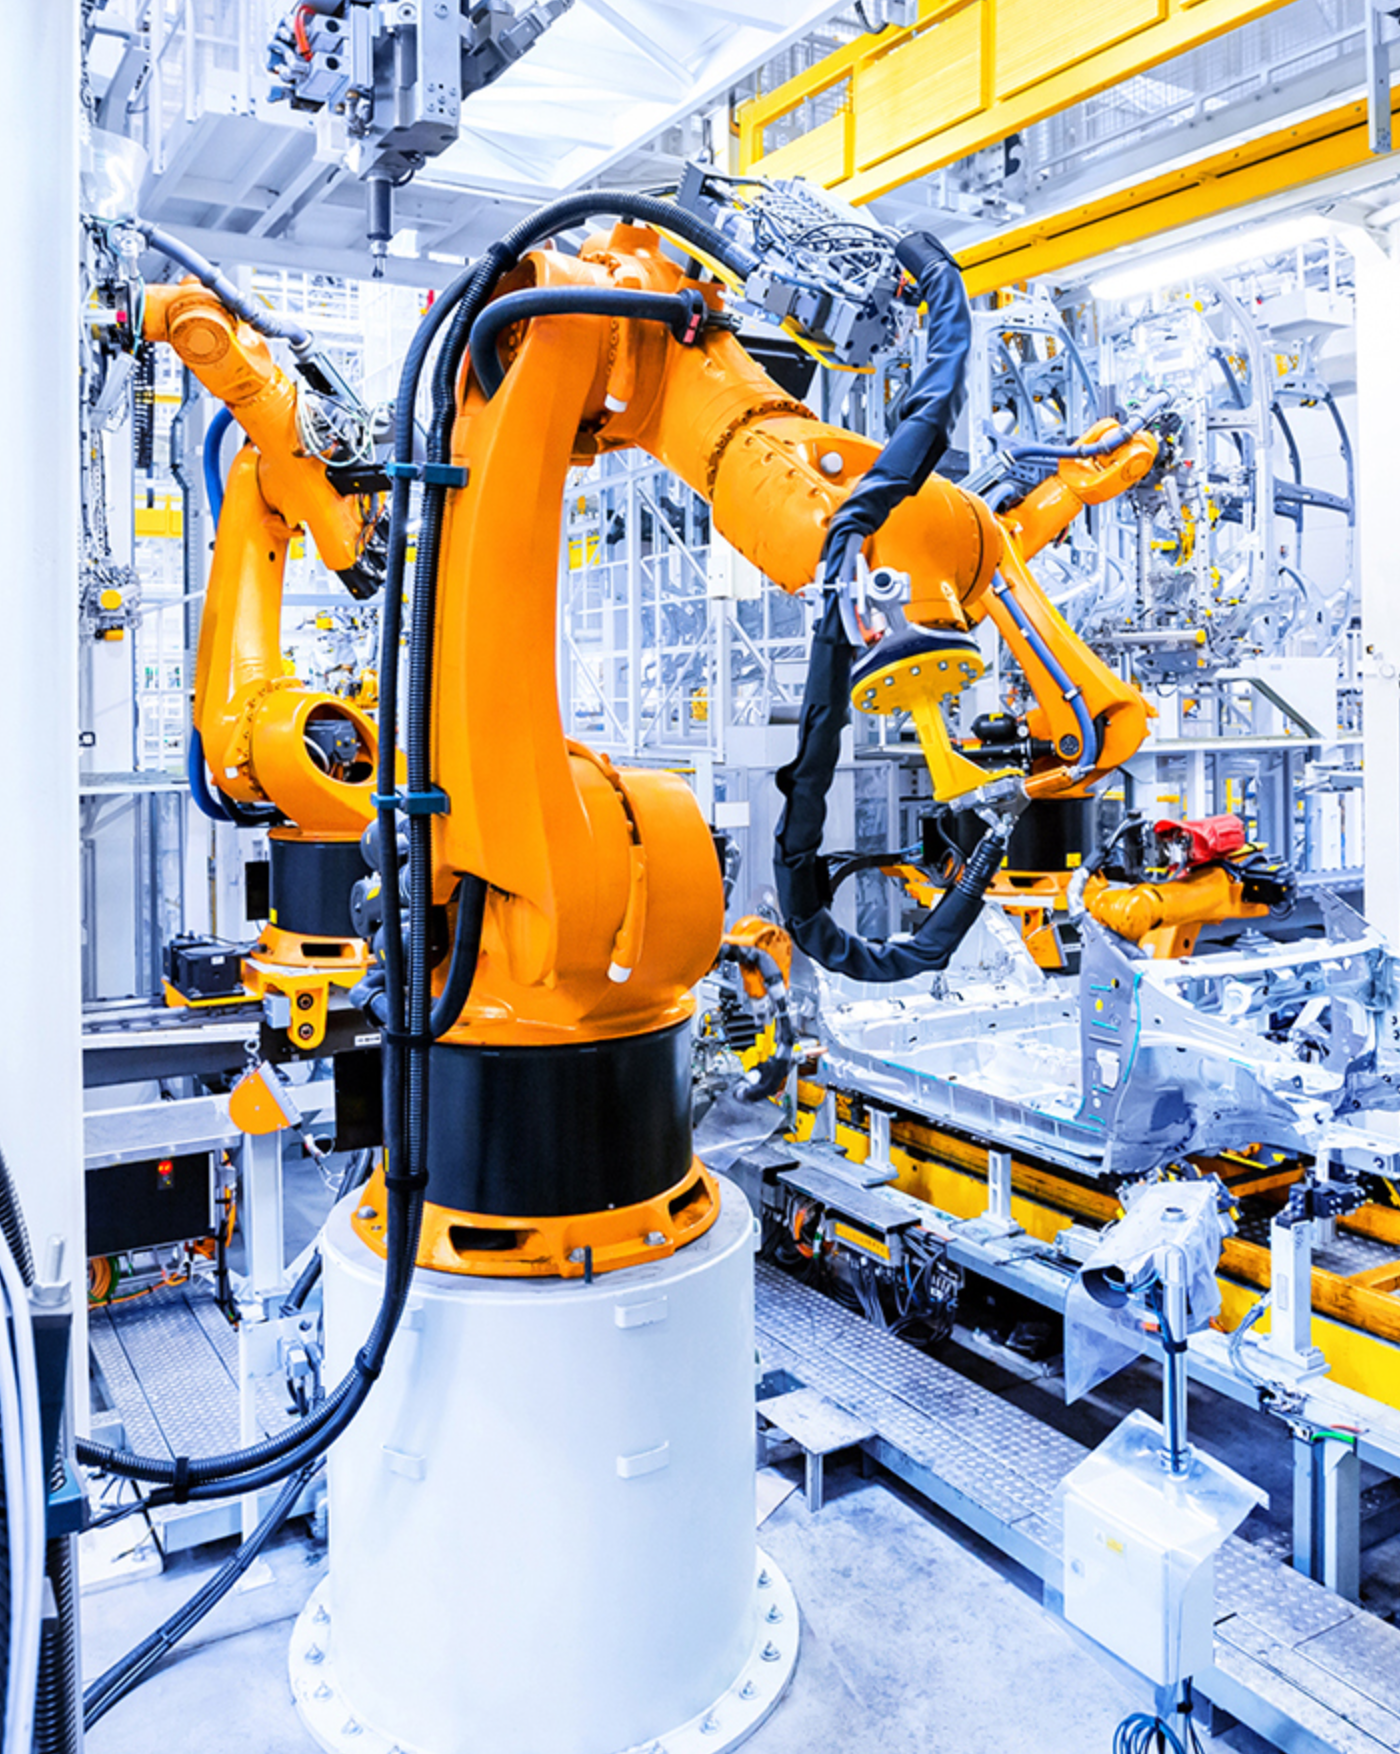 Registration is now open for Automation UK - where automation and robotics come to life